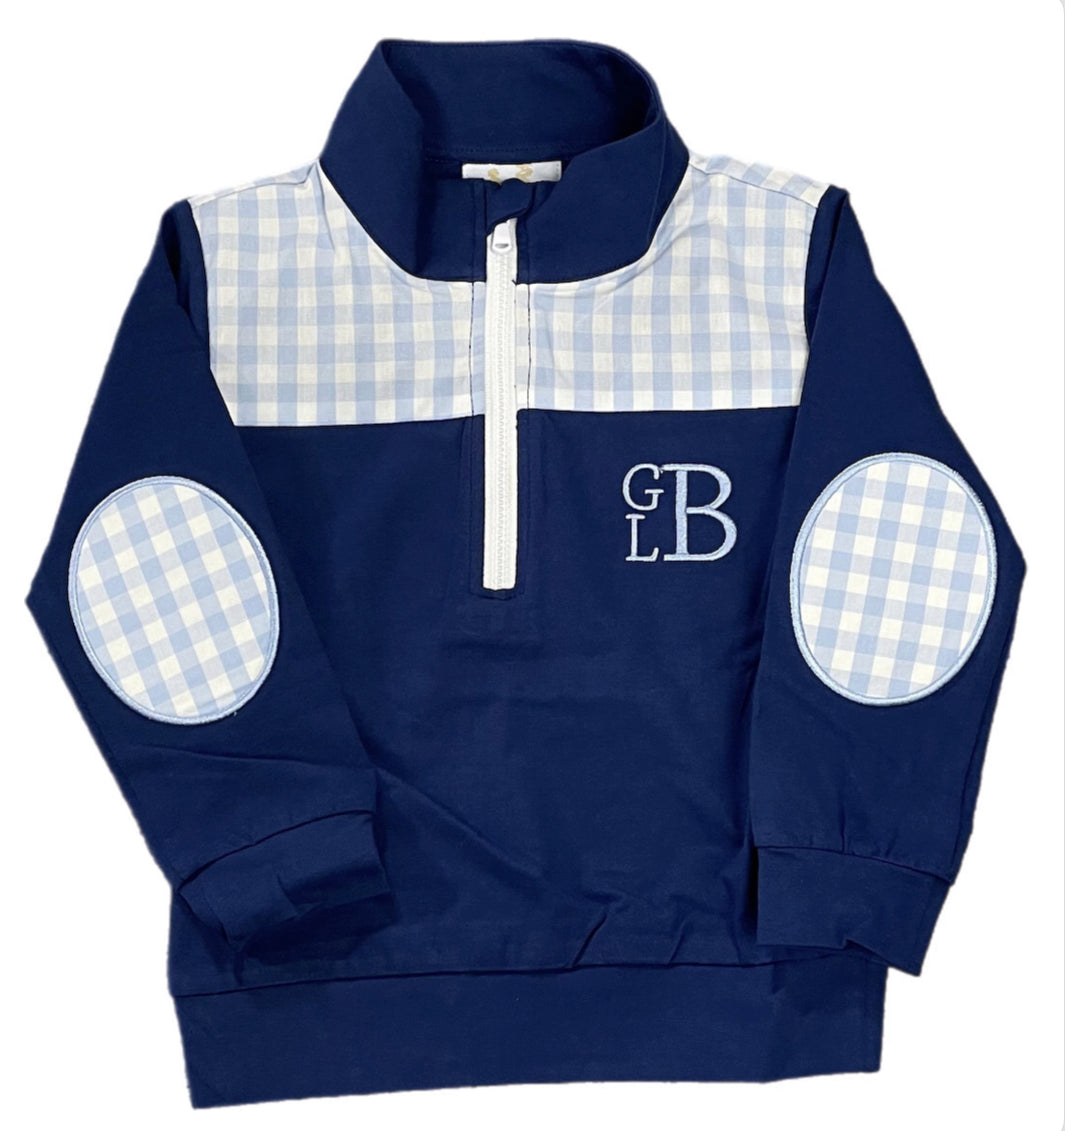 RTS: Boys Navy & Gingham Knit Pullover “GBL”